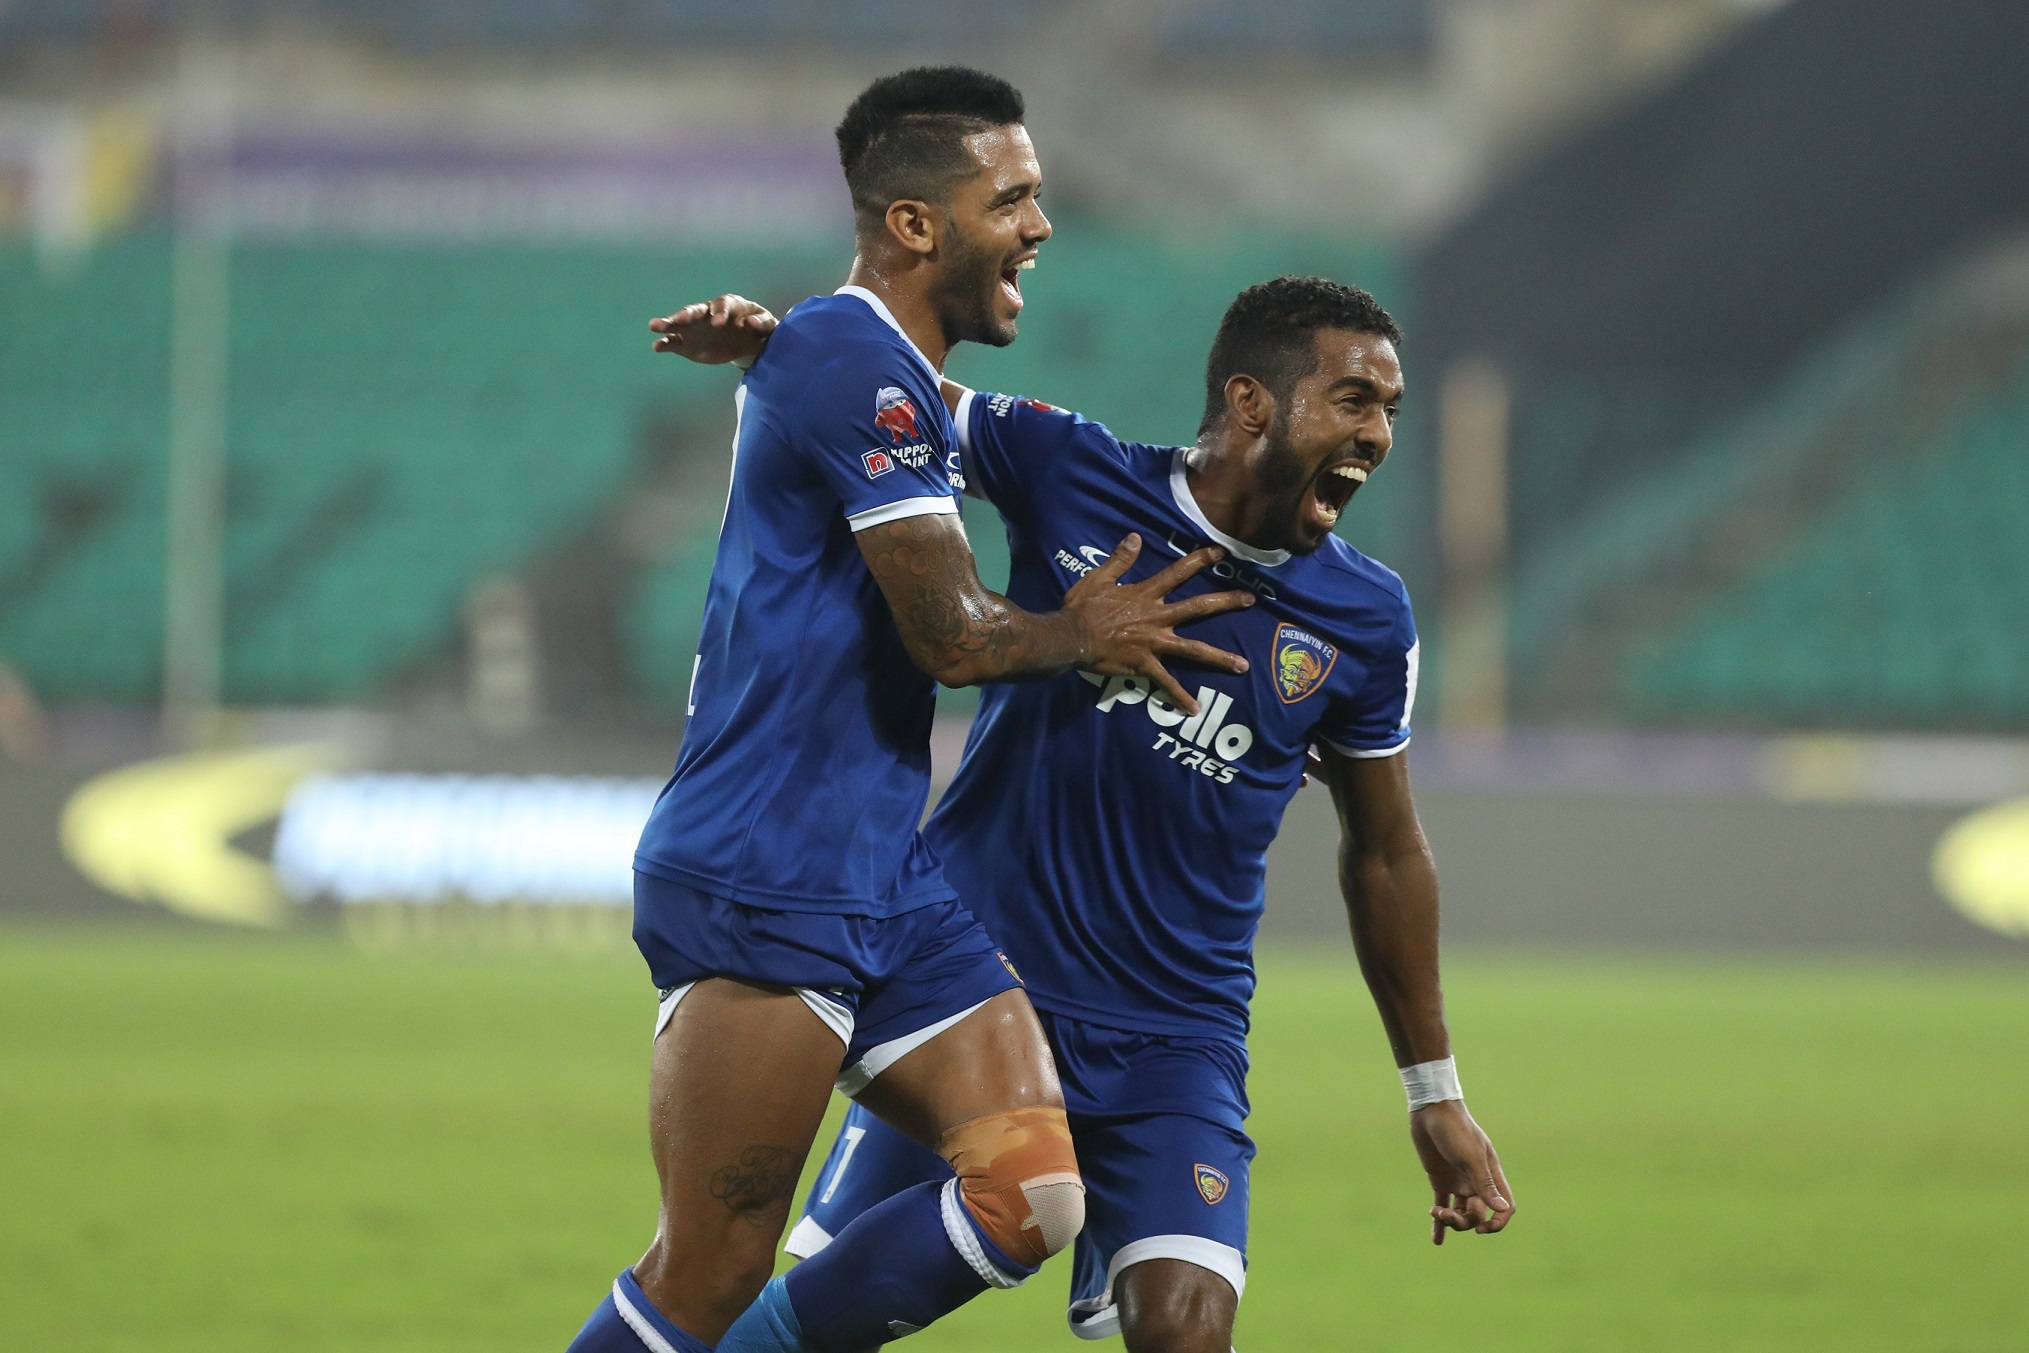 AFC Cup 2019 | Chennaiyin FC to play home matches at The Arena in Ahmedabad